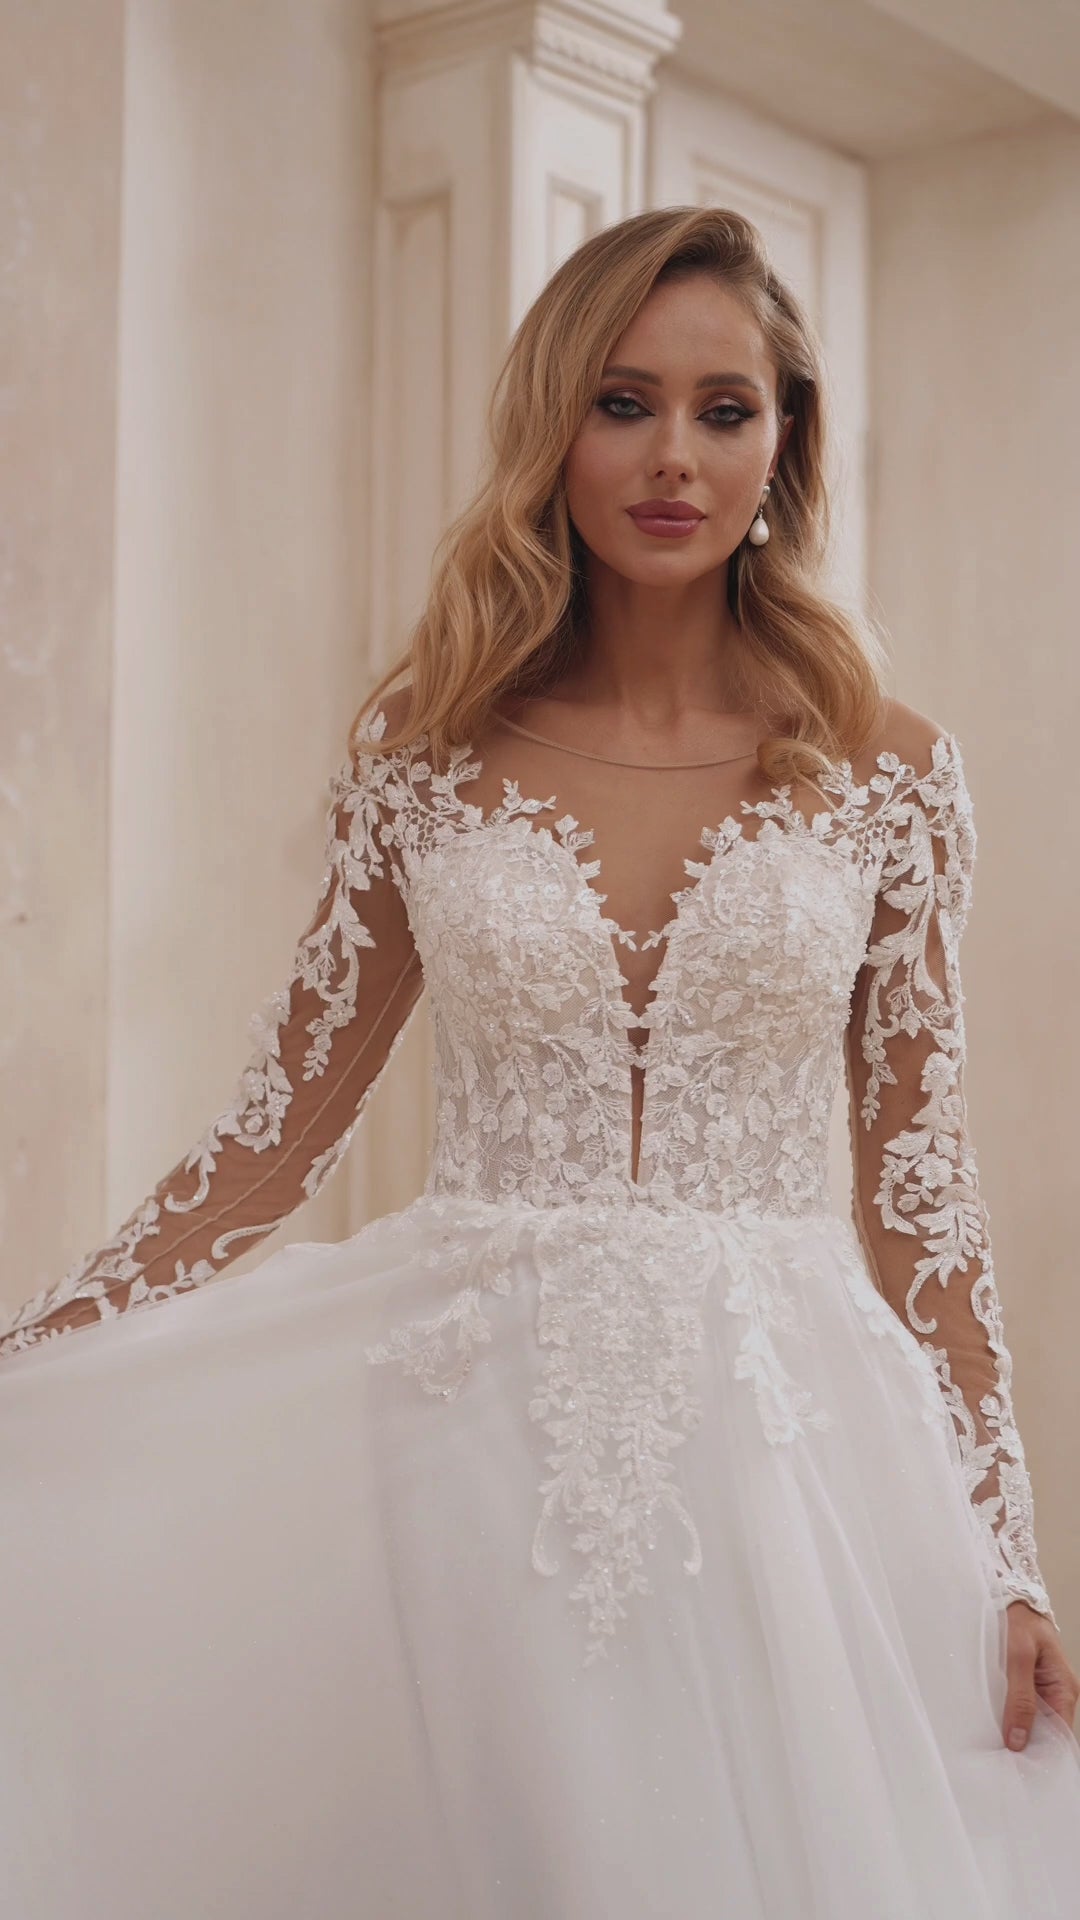 Elegant A-Line Bridal Gown with Lace Detail and Plunging Neckline Plus Size